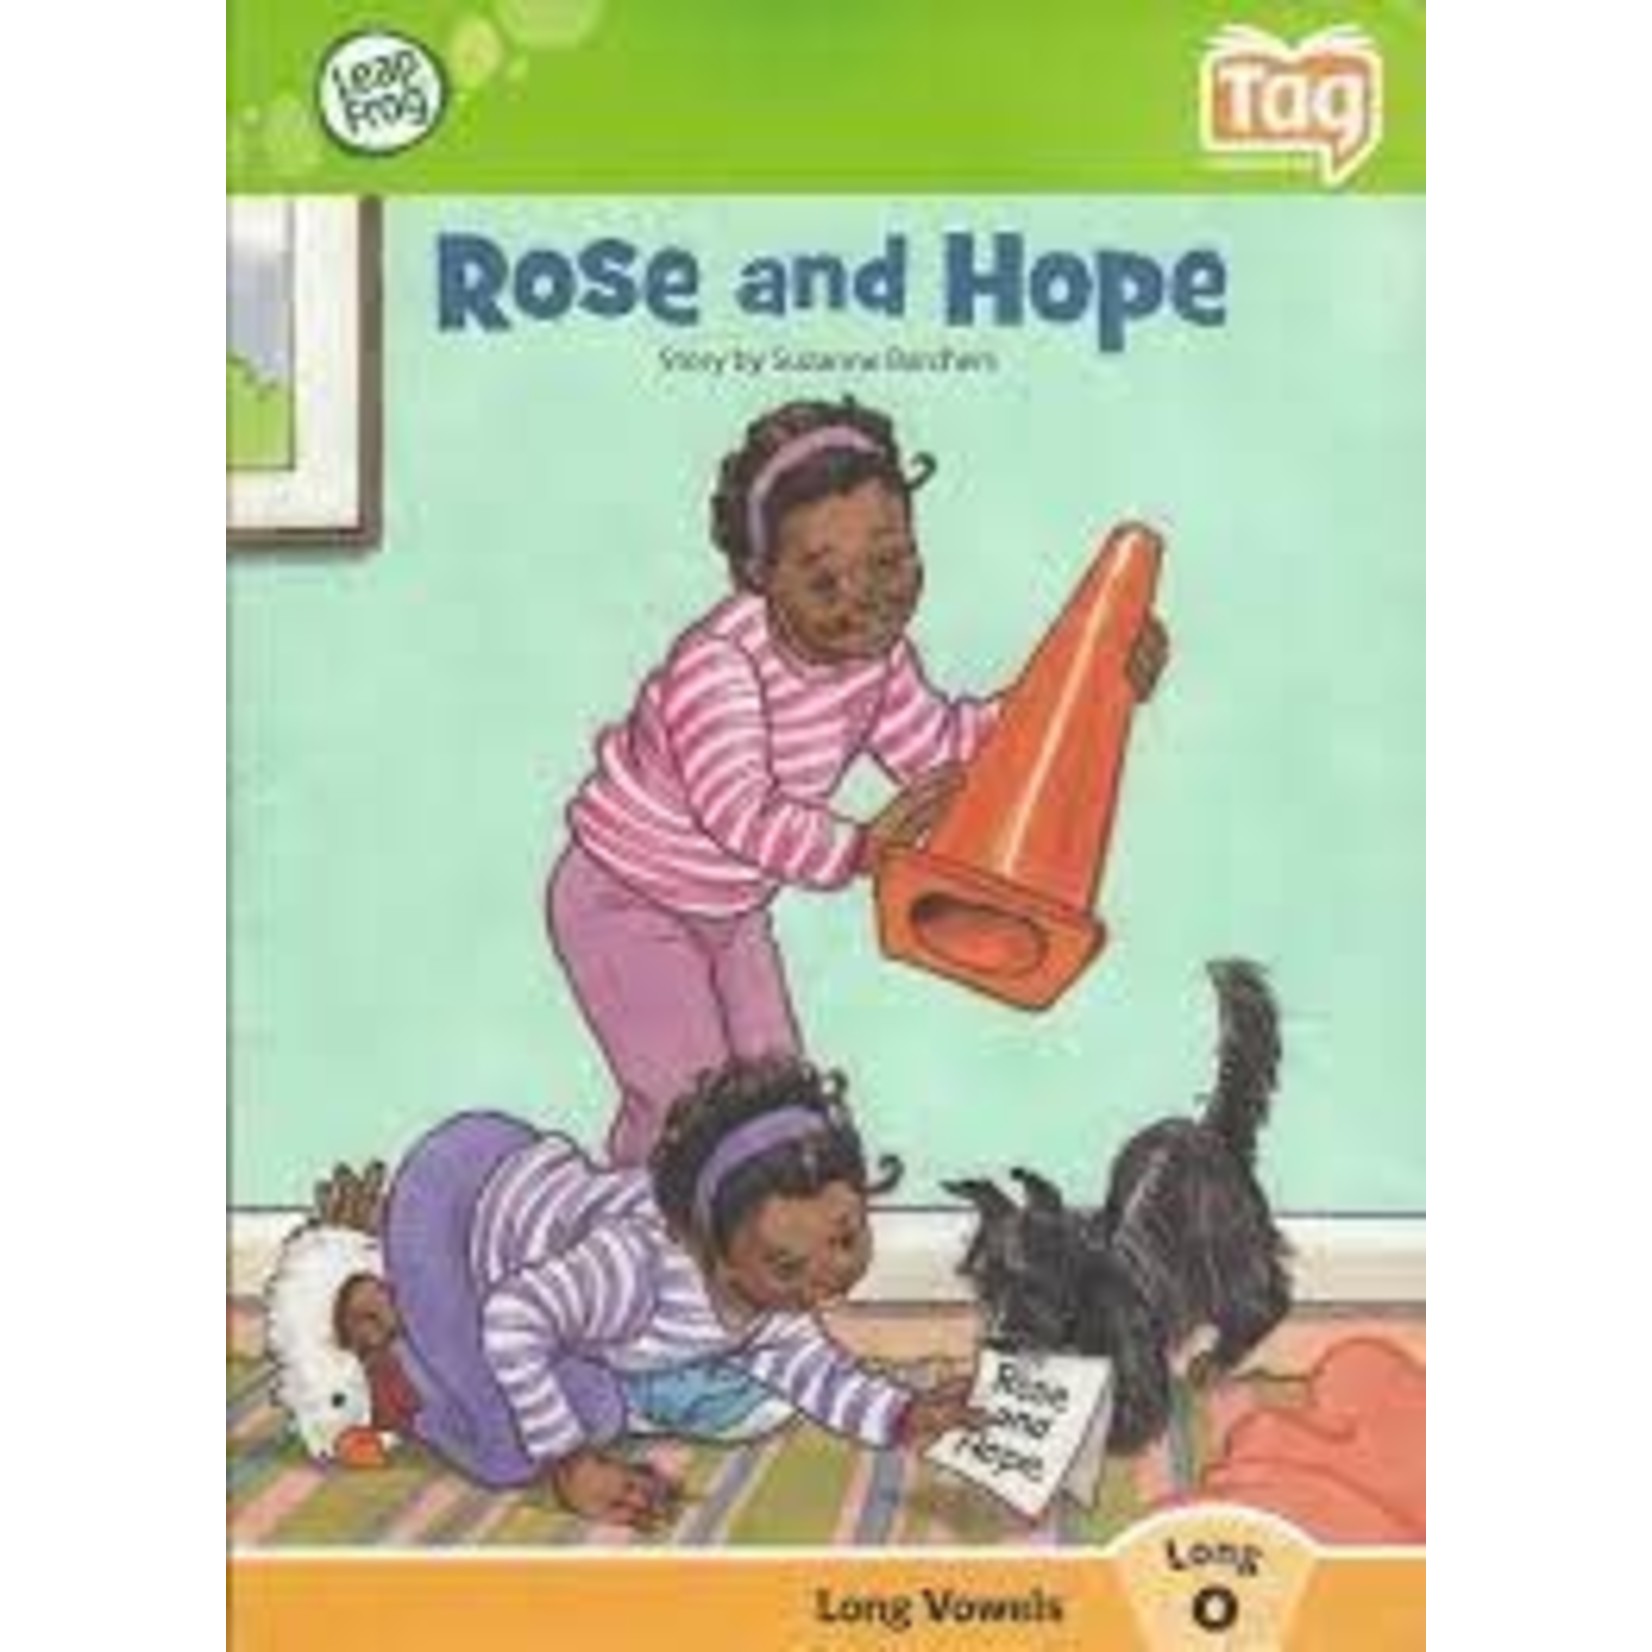 Tag Reading System - Rose and Hope